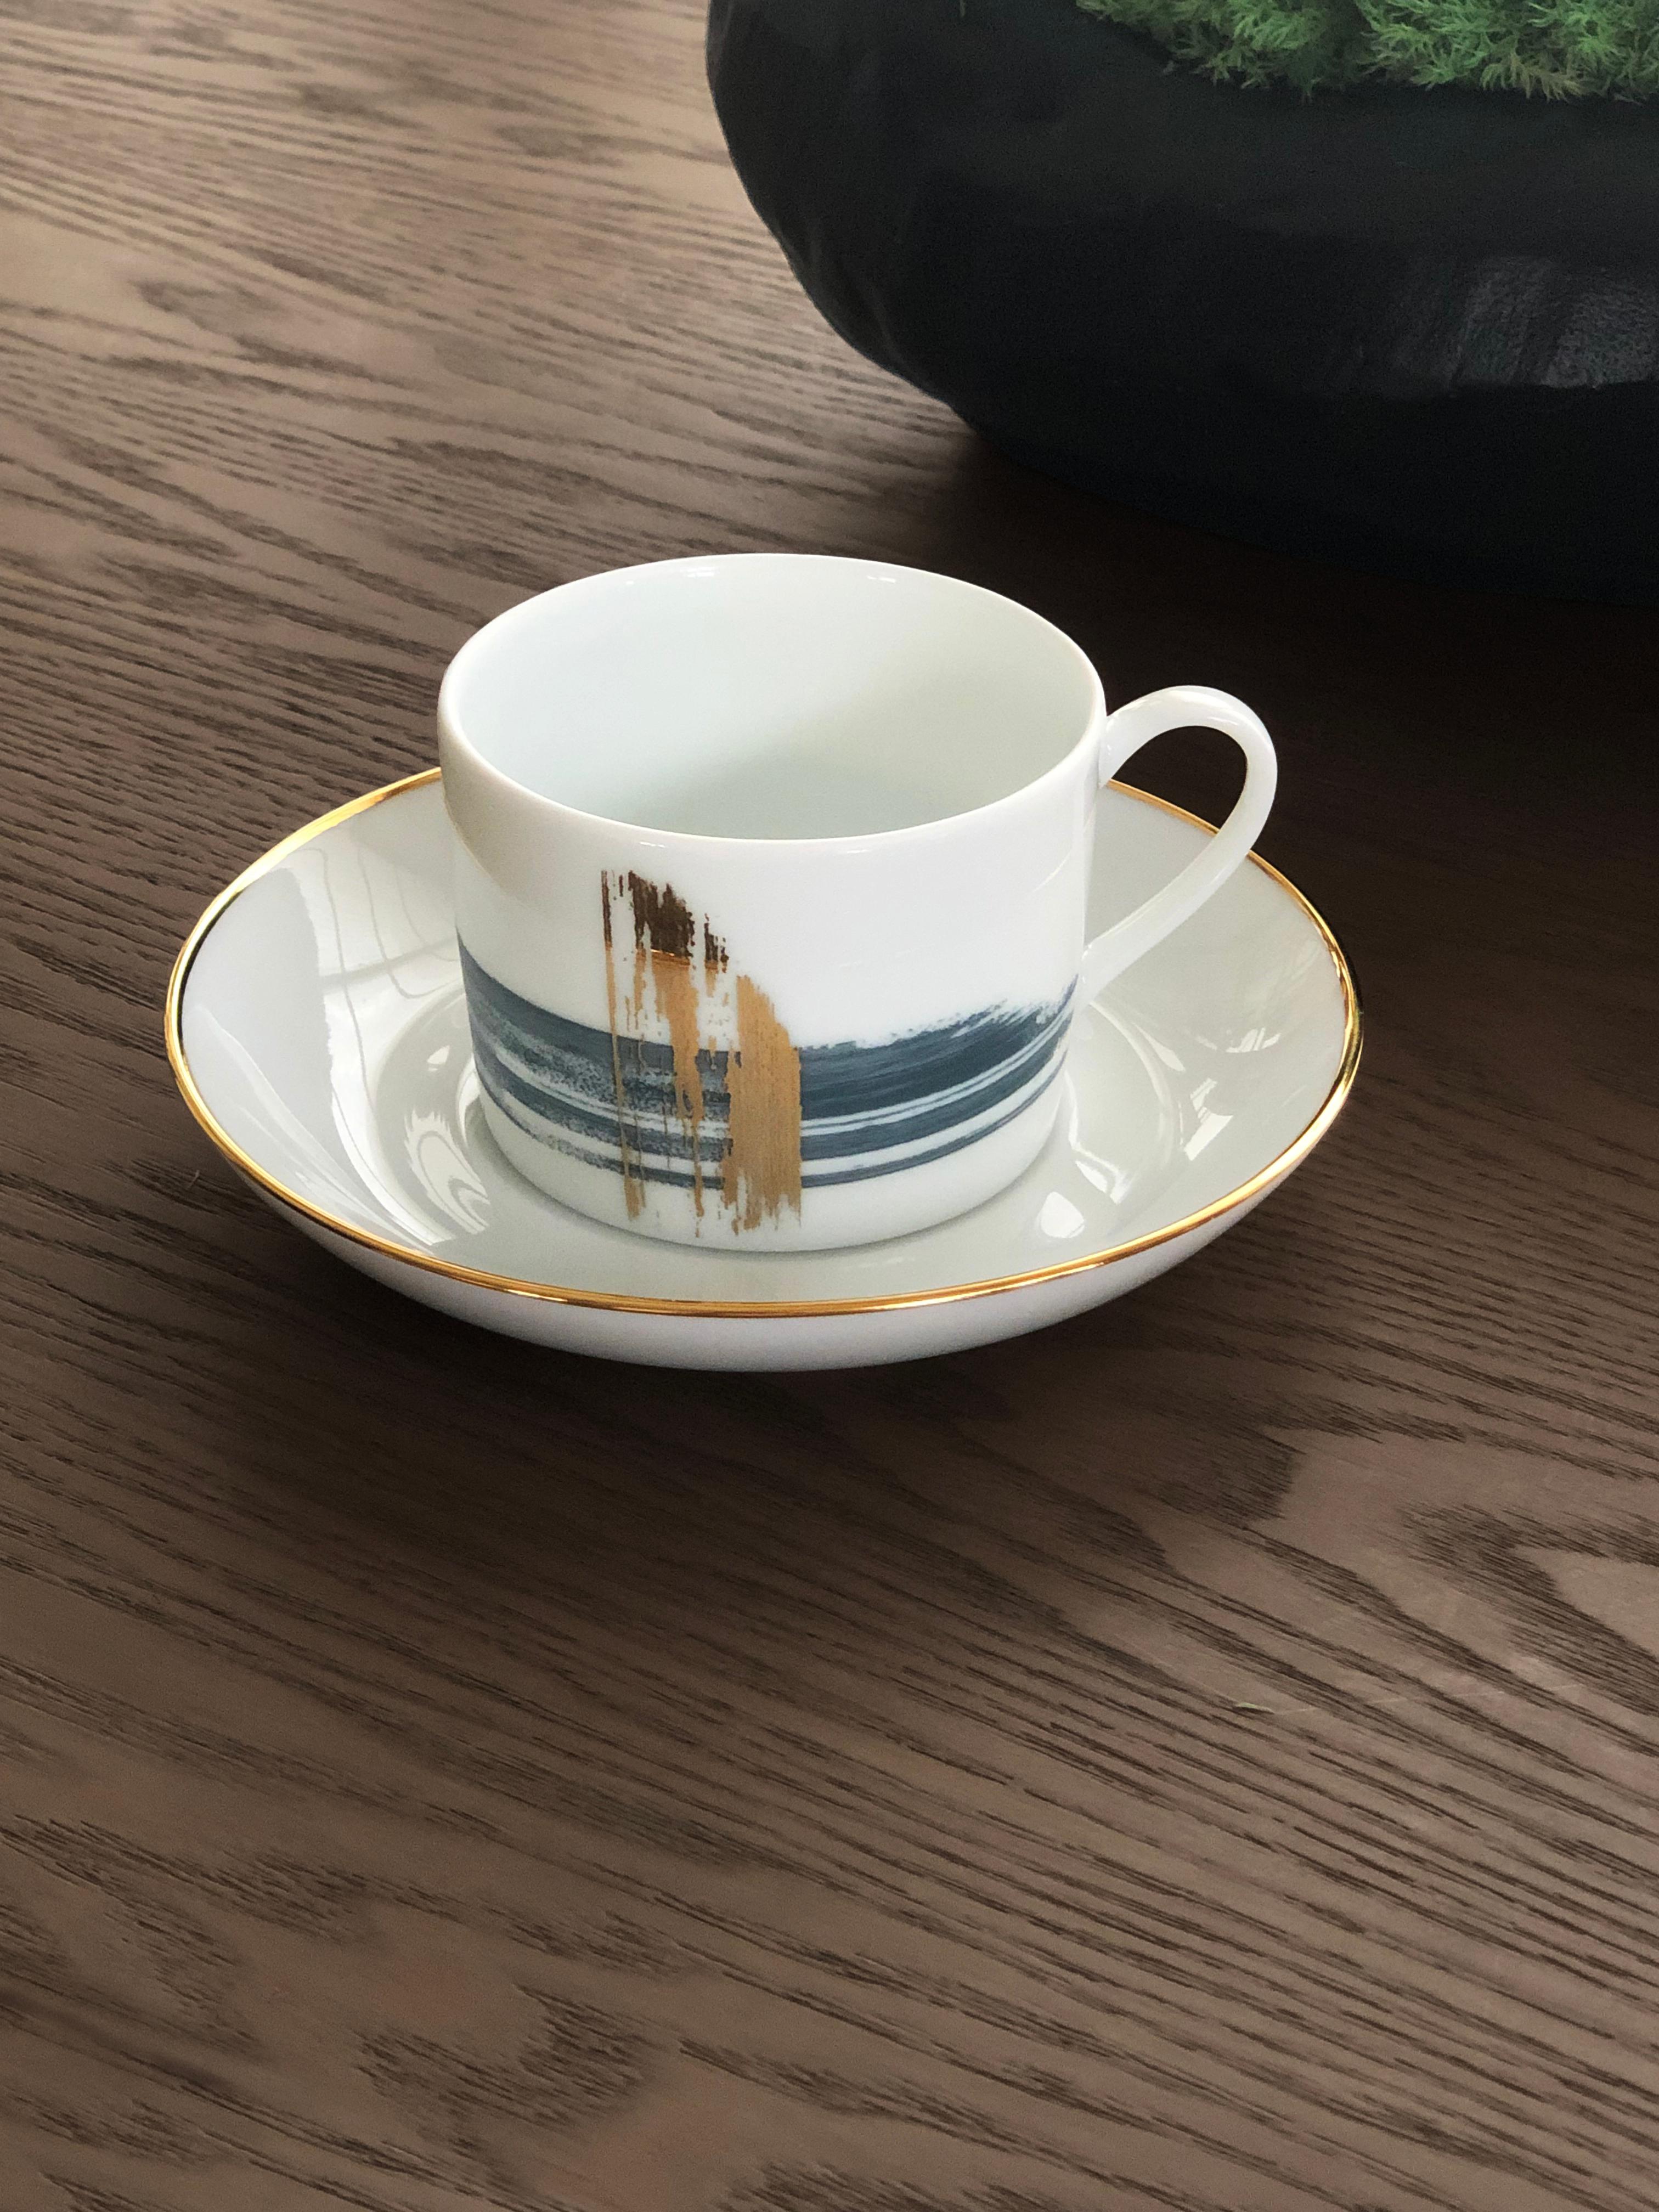 Larger quantities available upon request, with 8 weeks production time.

Description: Western tea cup with saucer (2 pieces)
Color: Blue and gold
Size: 7.5Ø x 5.5H cm, 170 ml
Material: Porcelain and gold
Collection: Artisan Brush